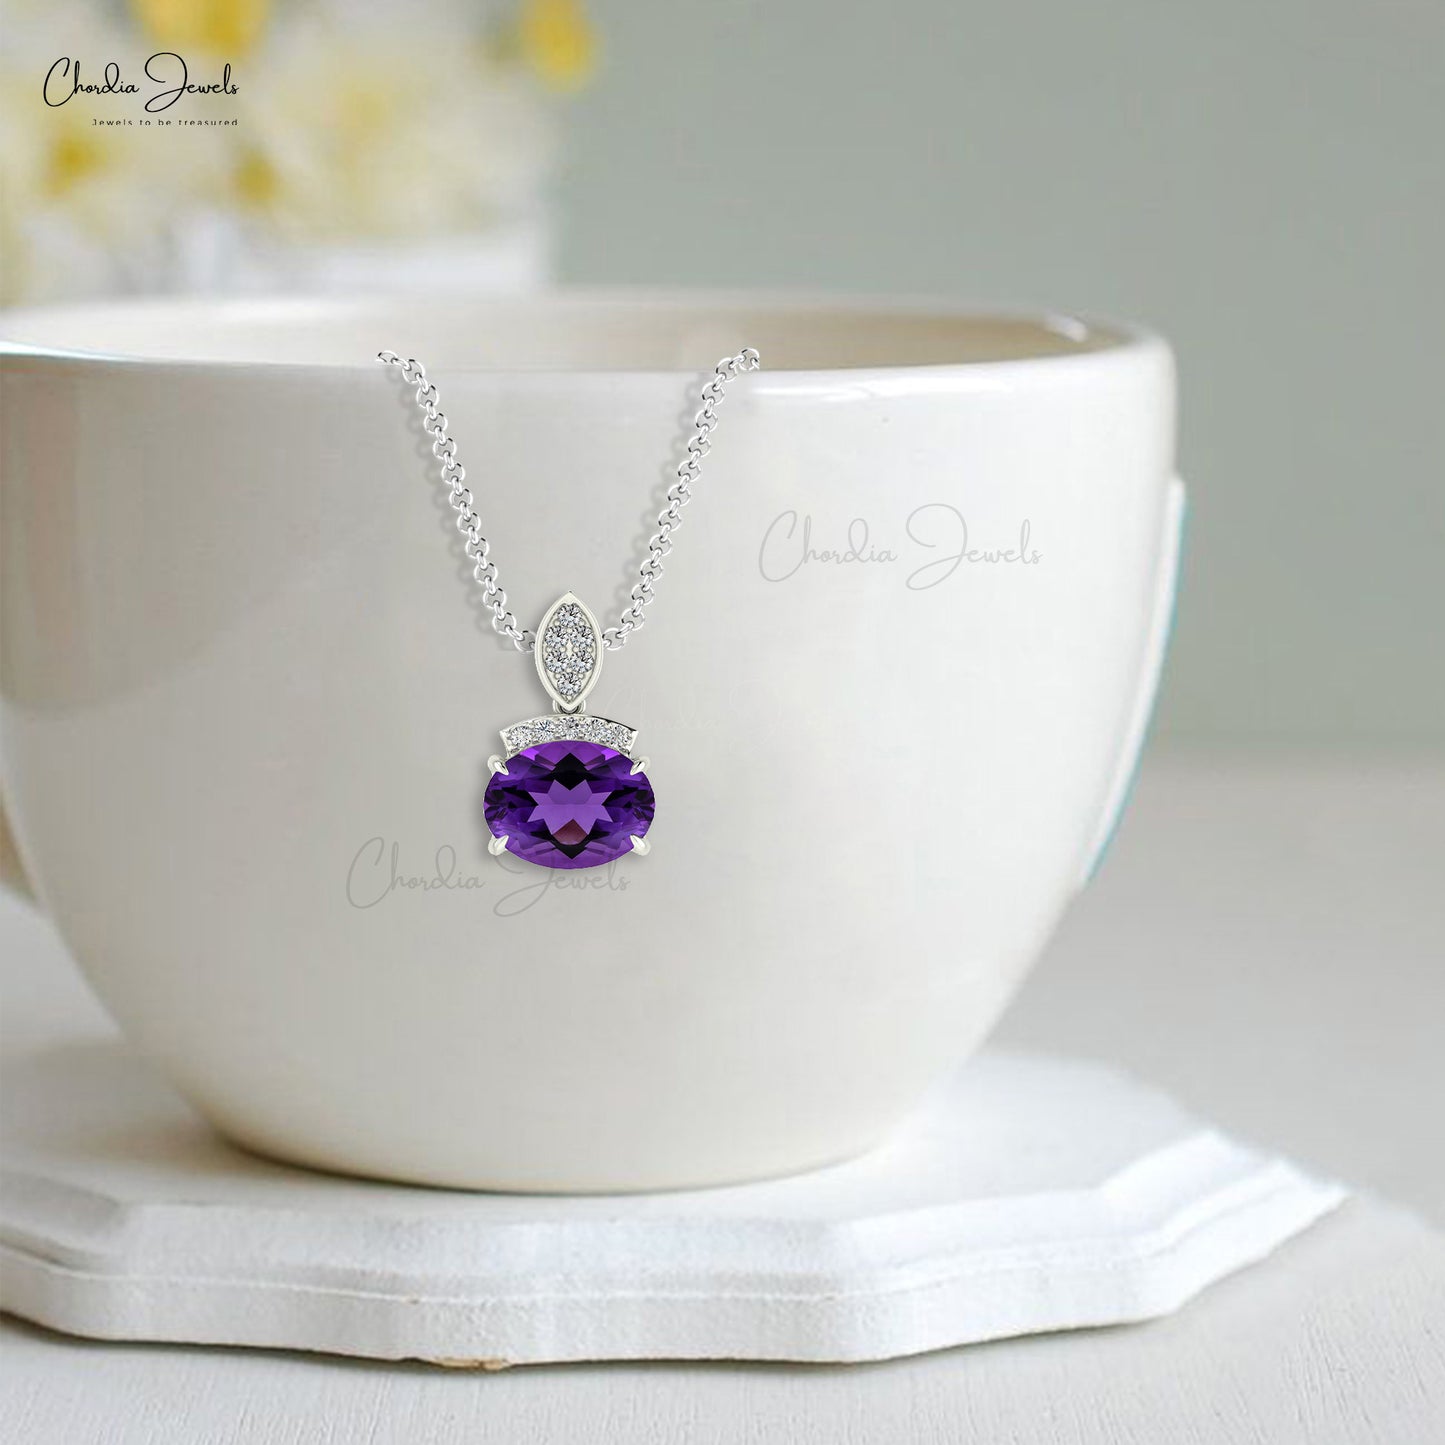 Genuine Amethyst Pendant, 14k Solid Gold Diamond Pendant, 8x6mm Oval Faceted Gemstone Pendant, Anniversary Gift for Her